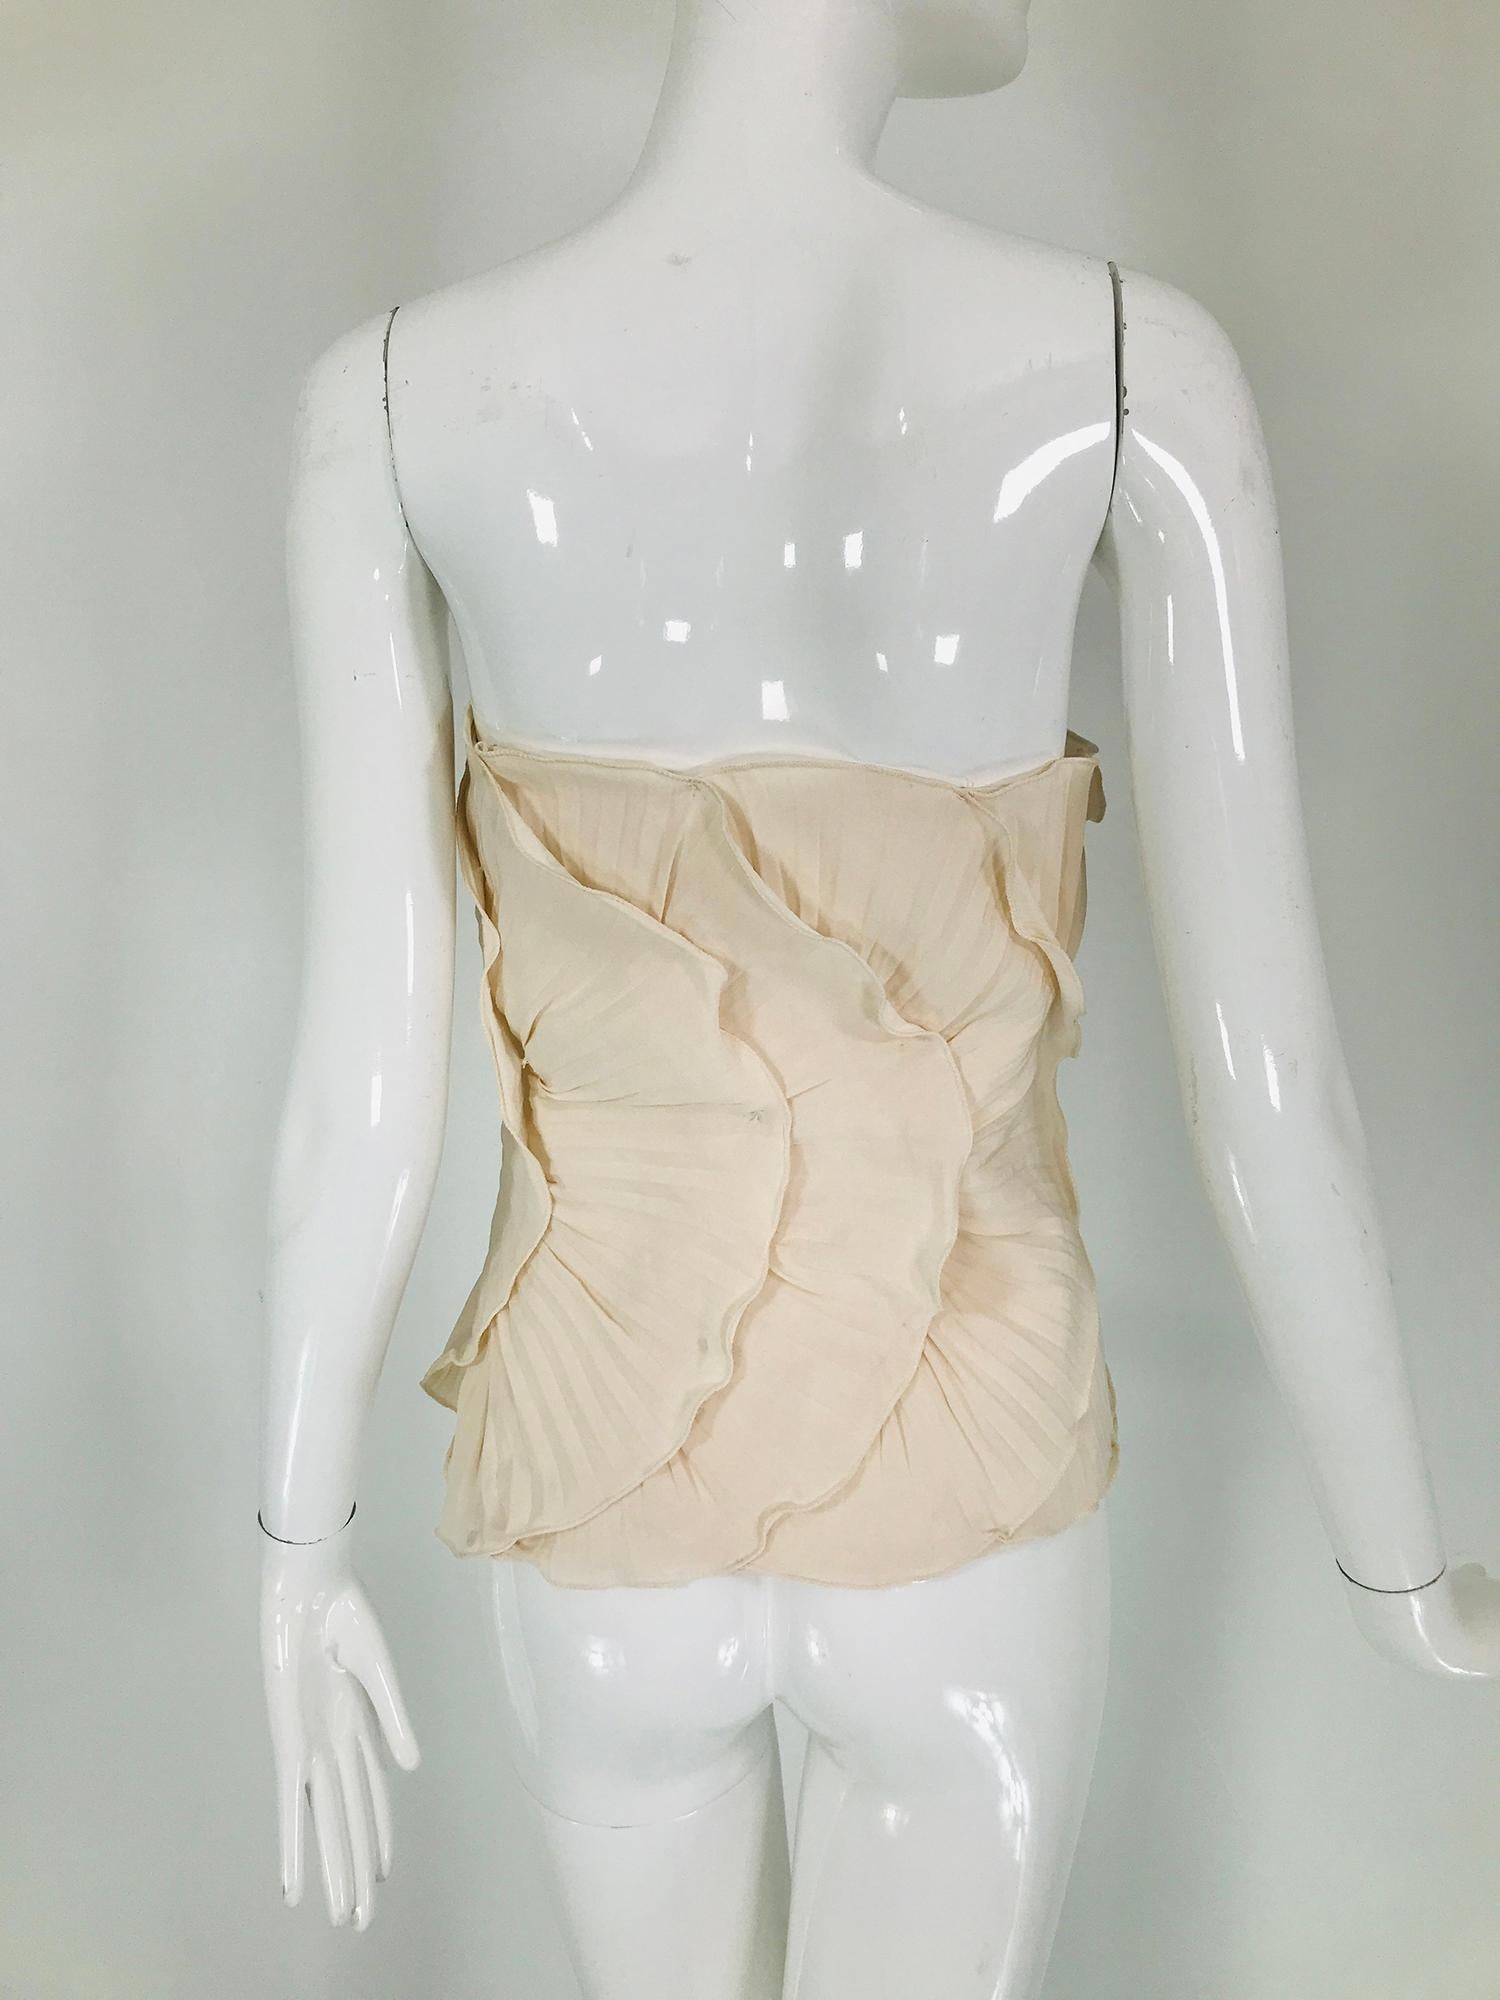 Mila Schon Ivory Bustier Plisse Silk 1980s unworn with tags size 40 For Sale 3